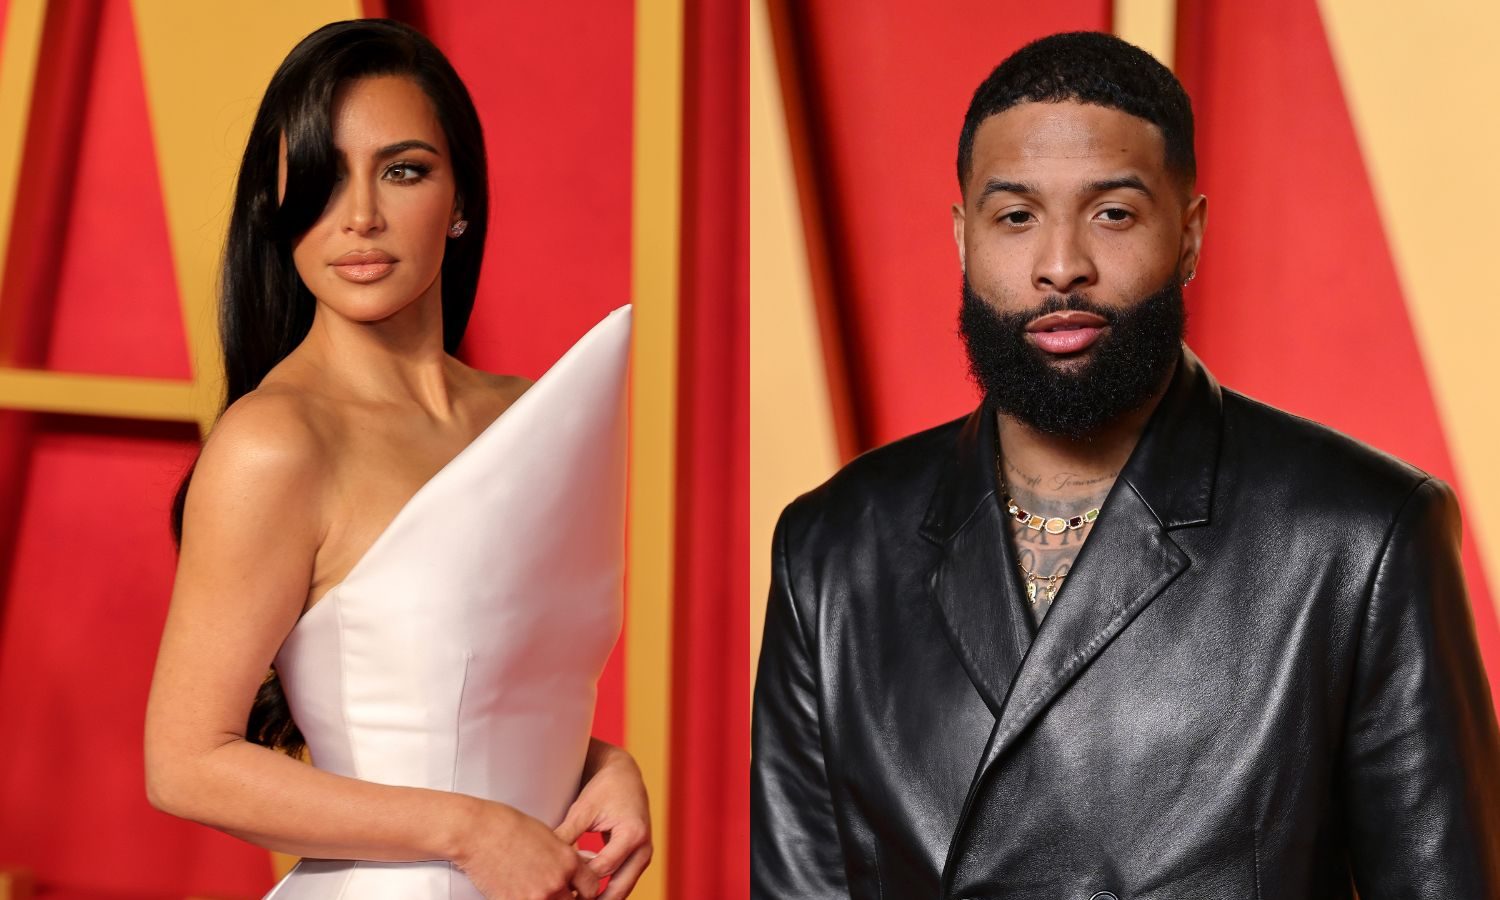 Touchy Feely? Watch Kim Kardashian Caress Odell Beckham Jr. At Oscars After Party (Video) thumbnail